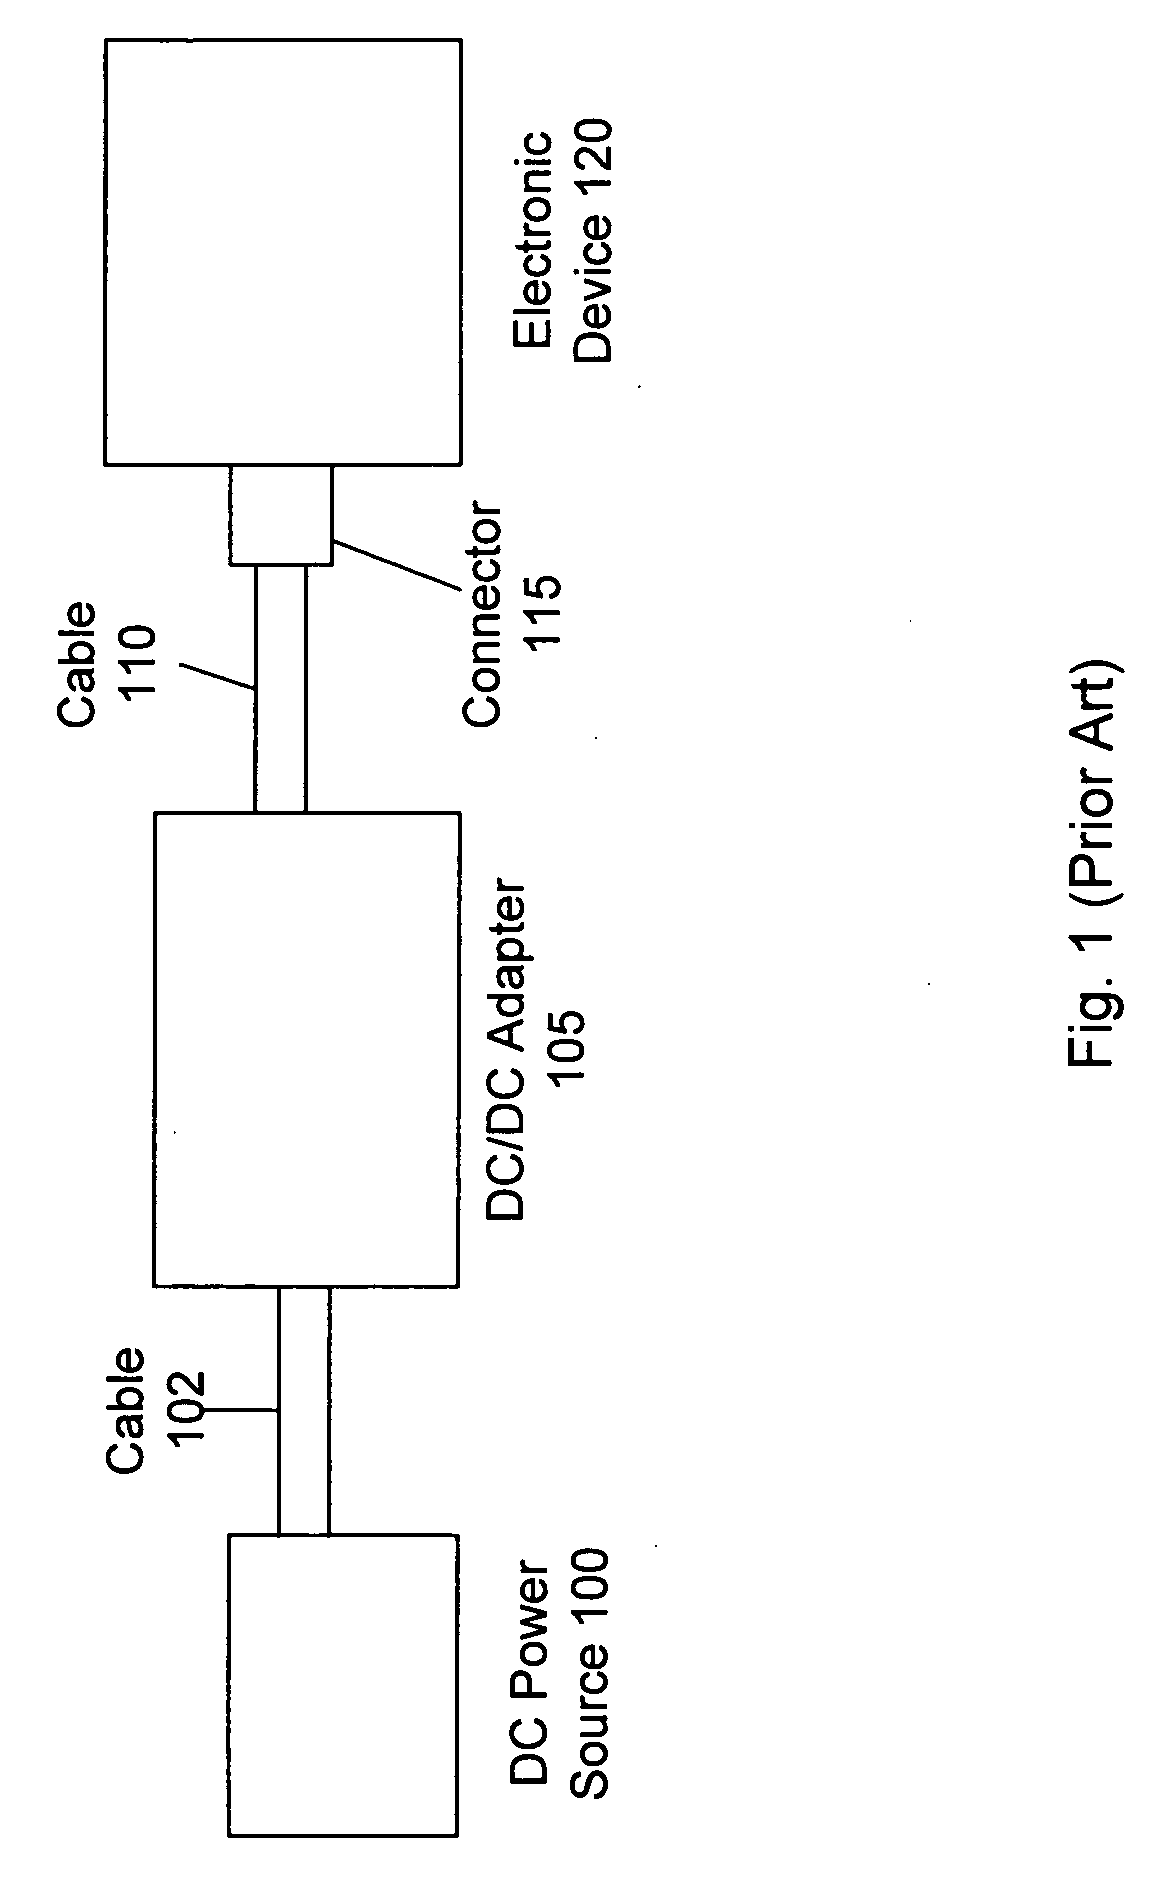 DC power source determination circuitry for use with an adapter